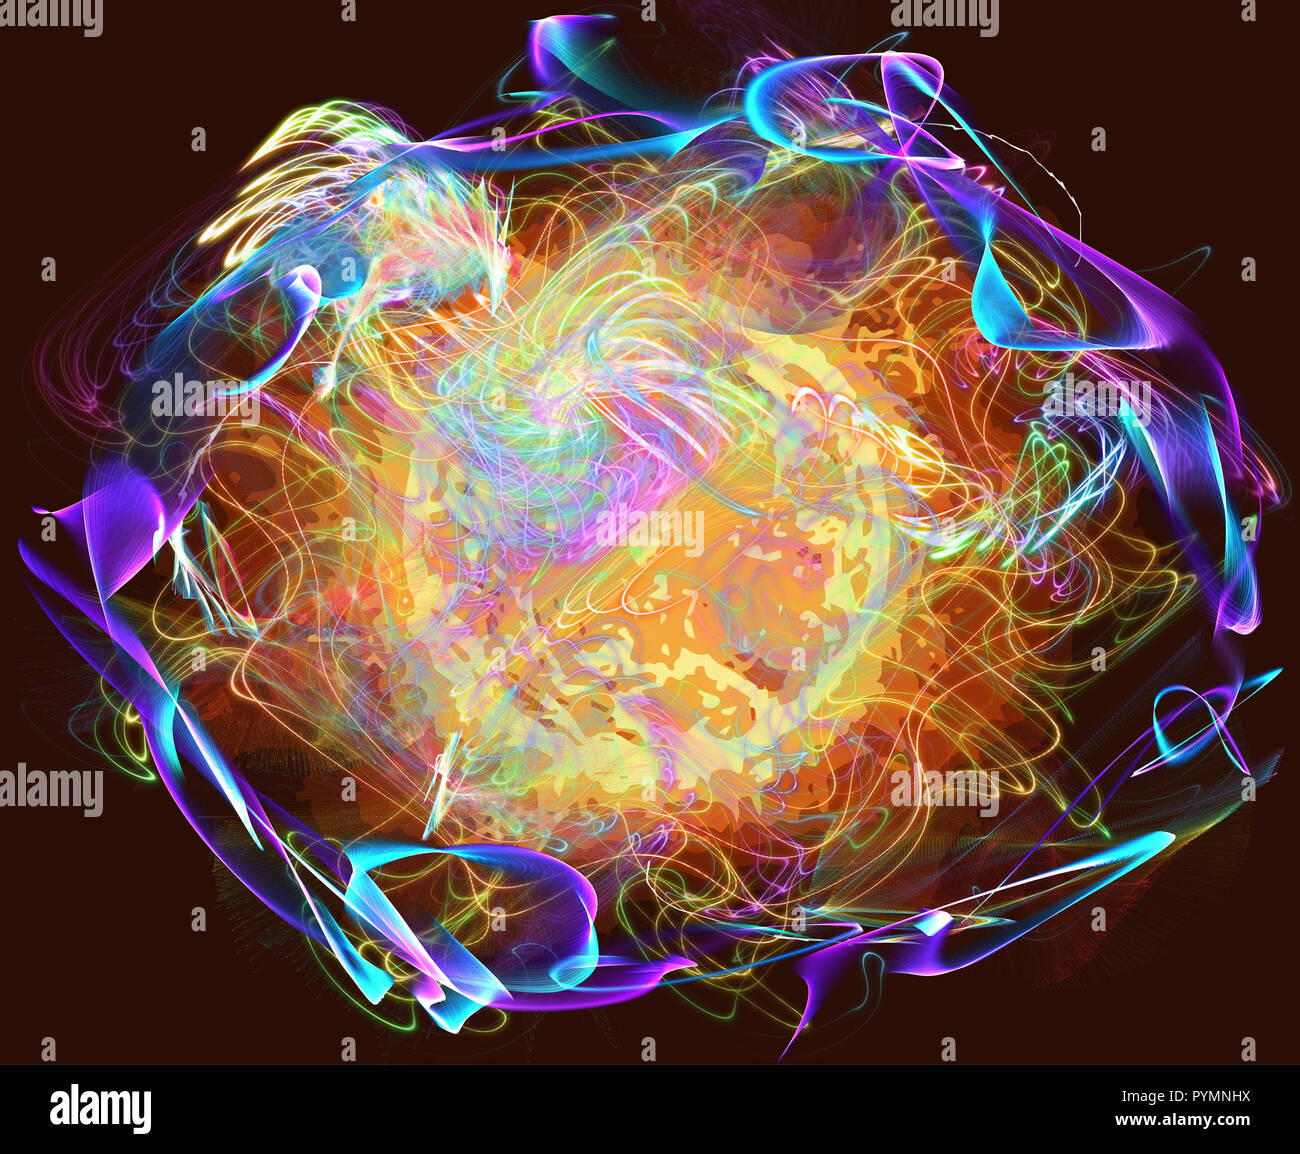 A fireball or abstract nuclear explosion as a light background Stock Photo